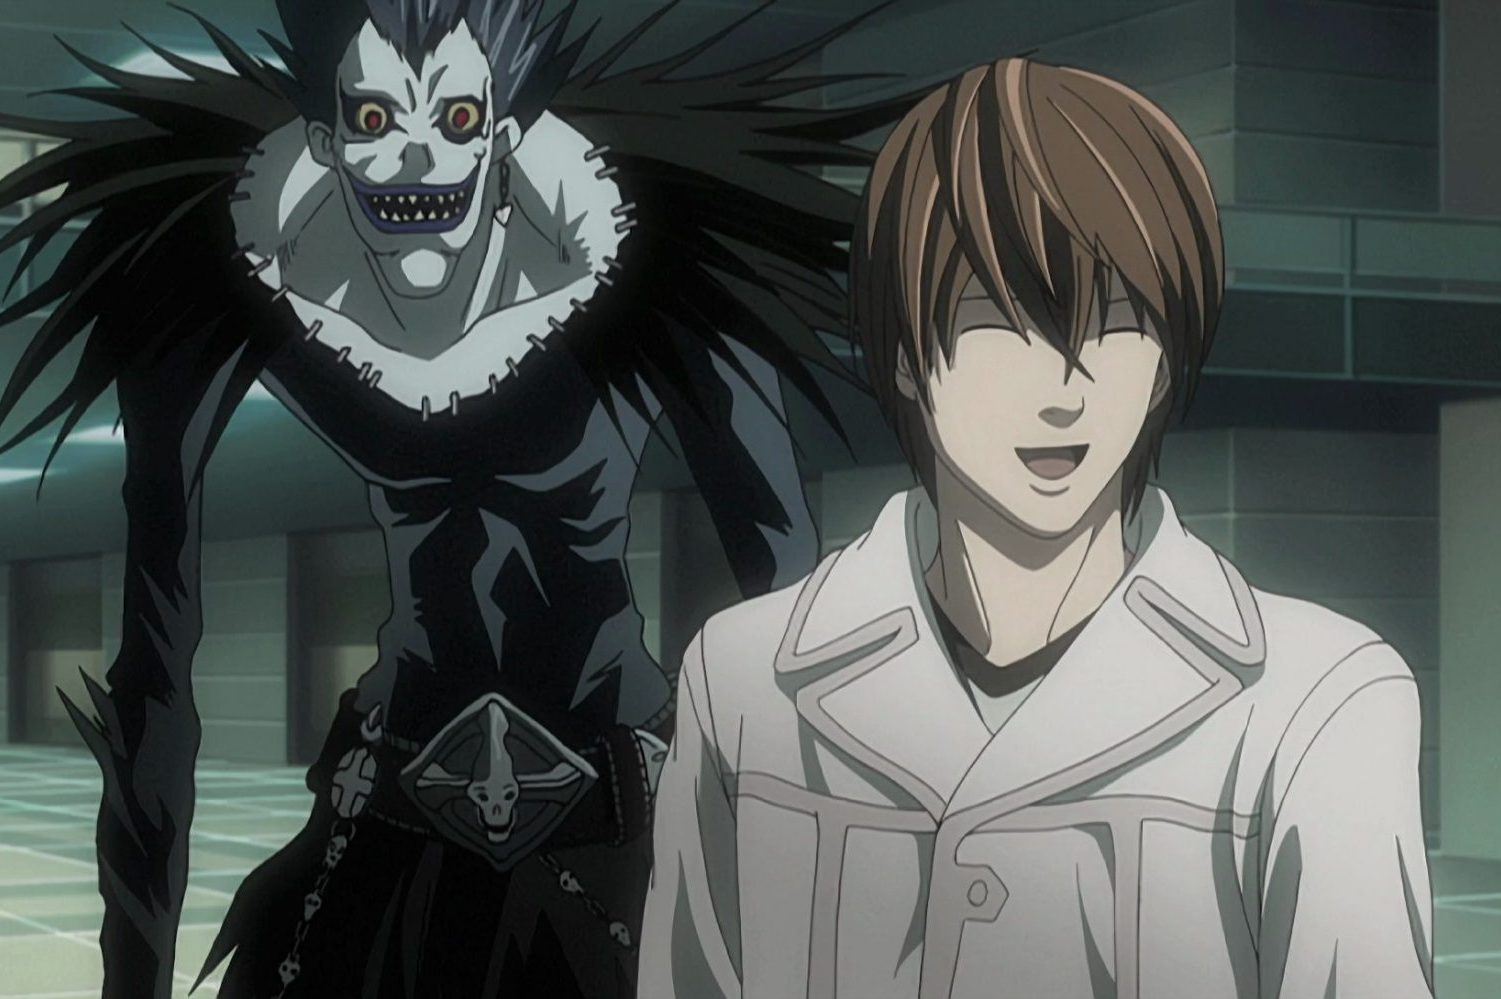 Anyone got good anime recommendations that are somewhat like deathnote  r deathnote